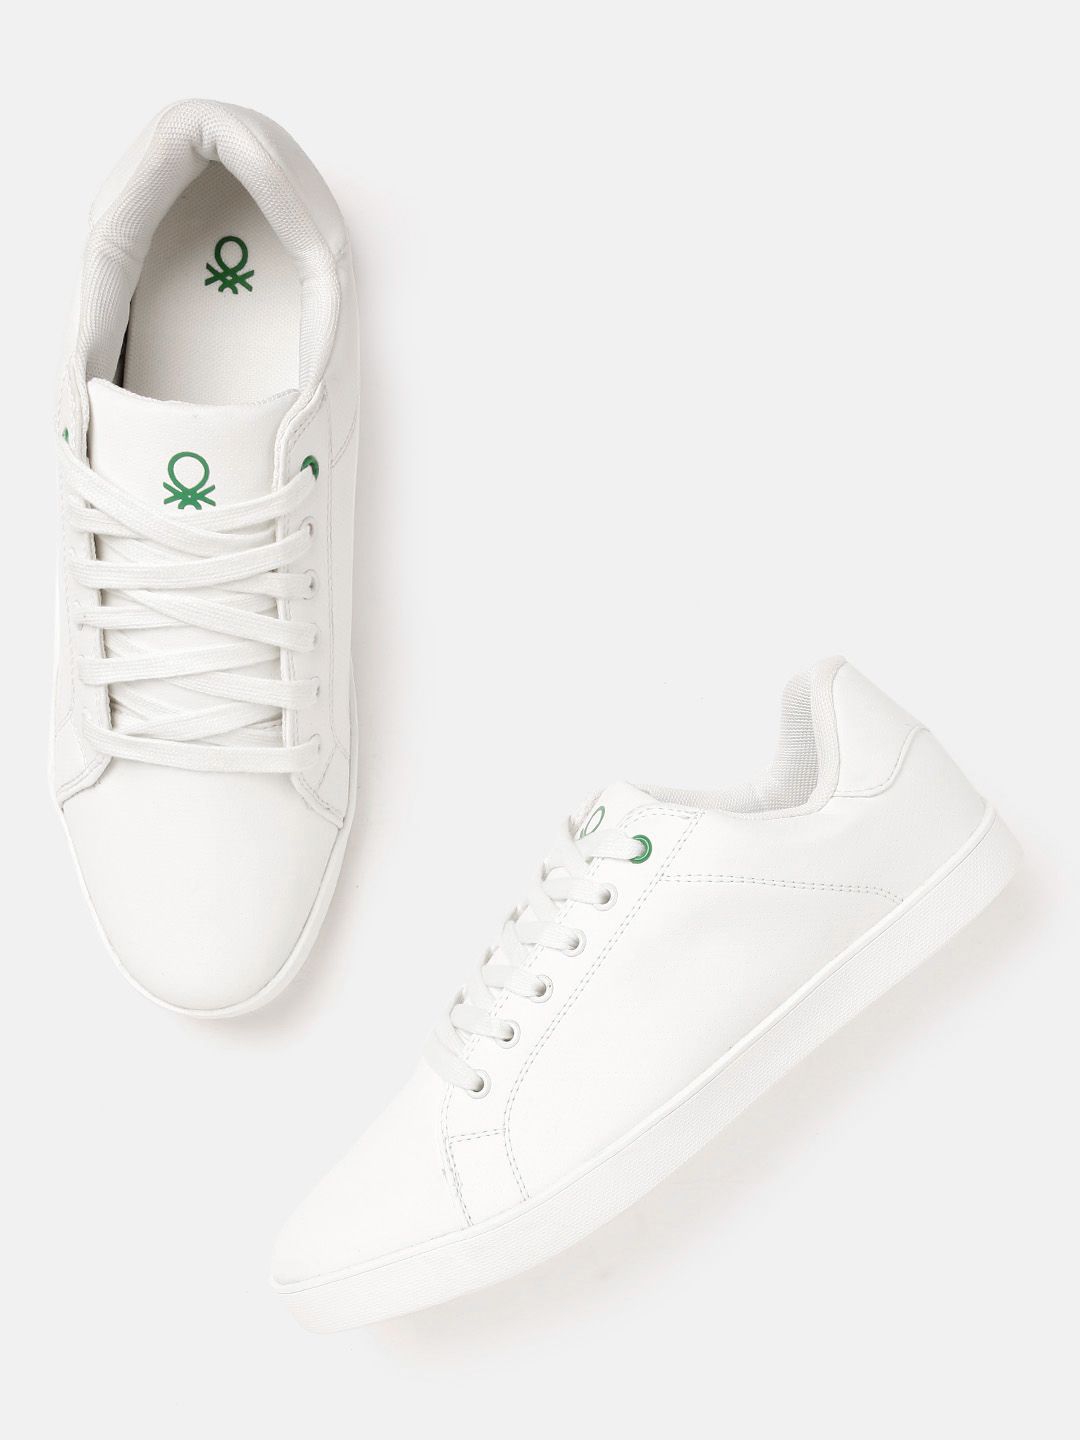 United Colors Of Benetton Men White Sneakers Sale Online | head.hesge.ch